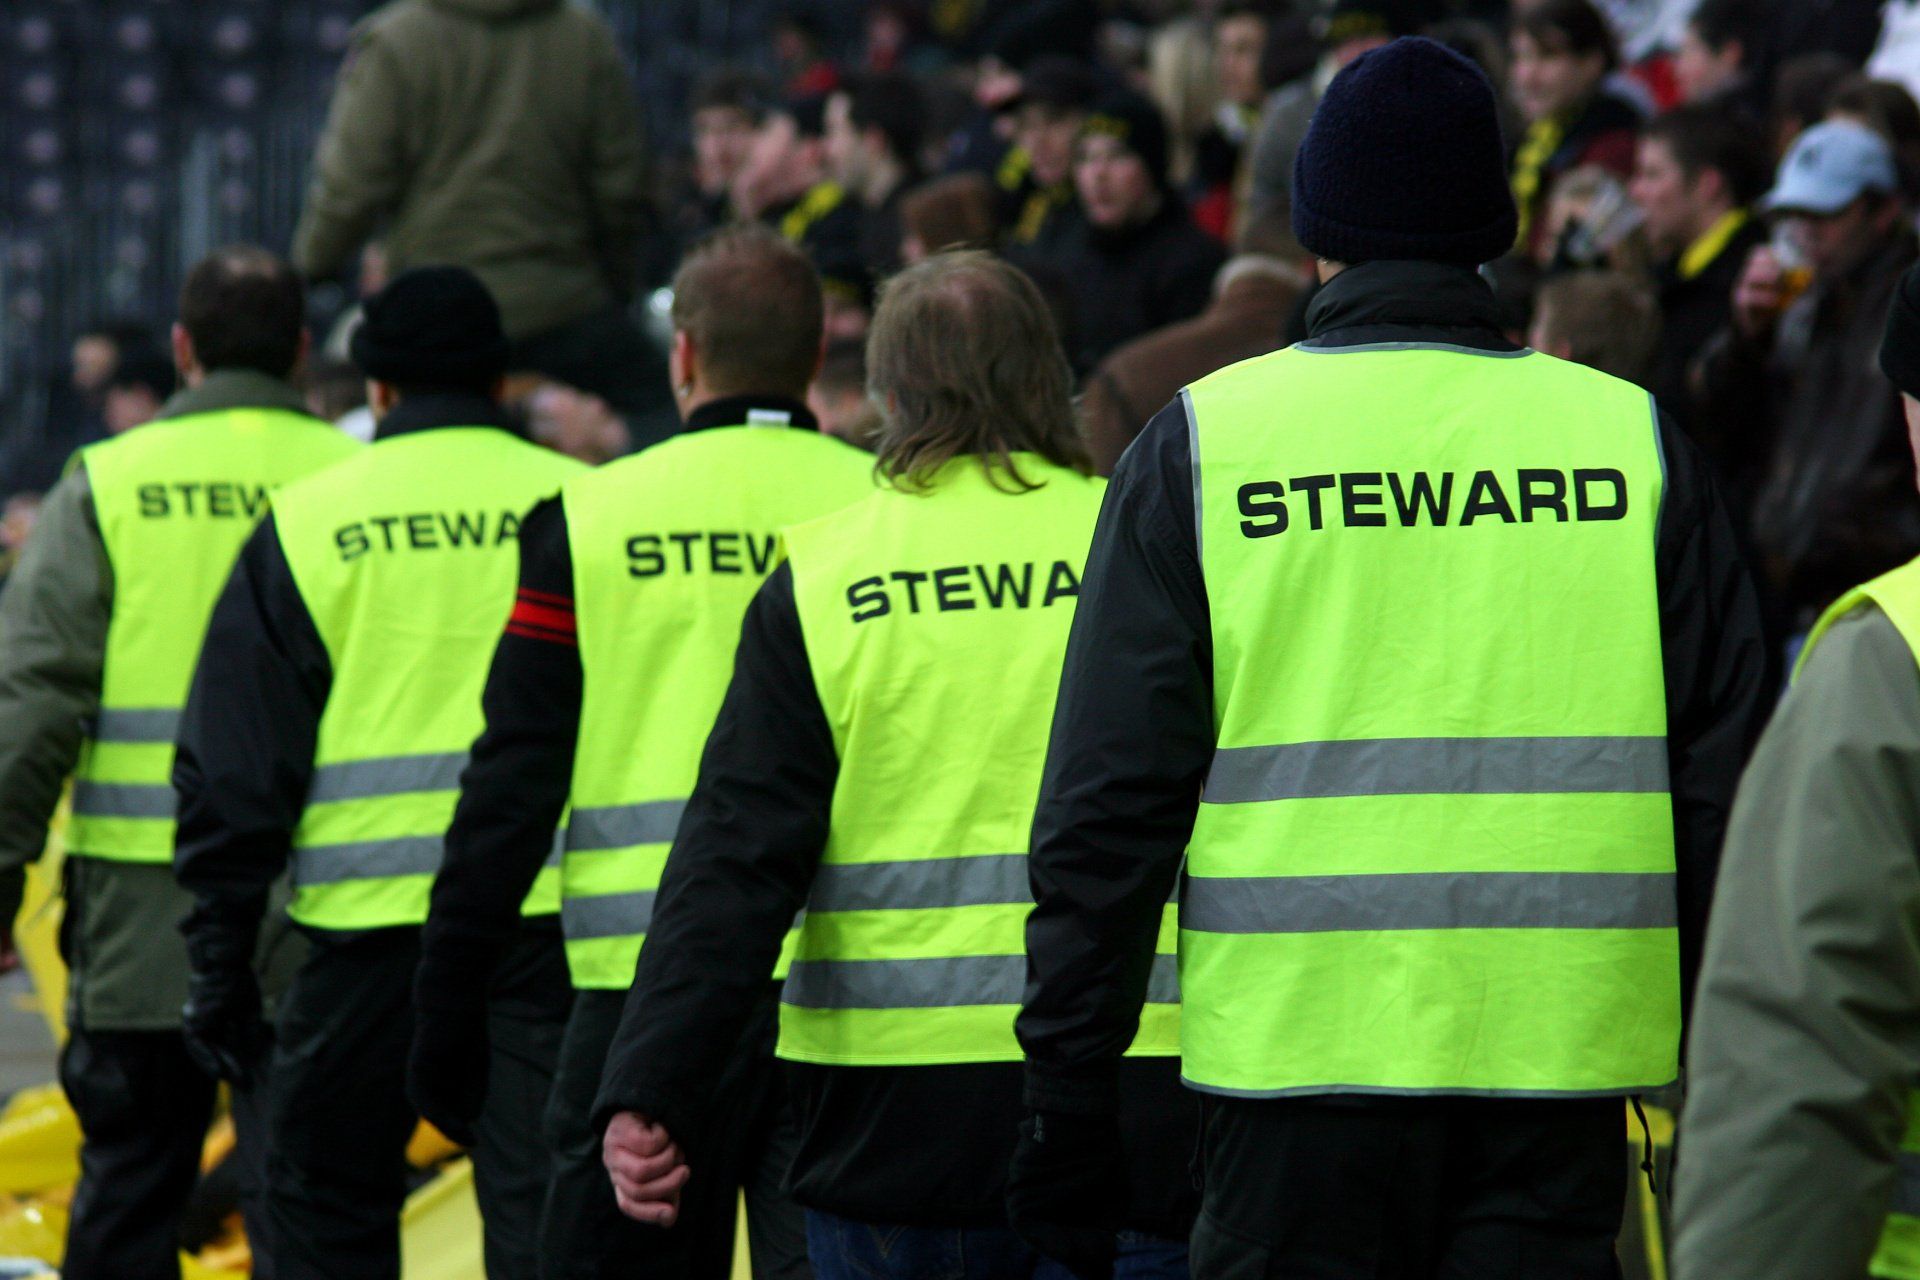 A group of people wearing yellow vests that say steward